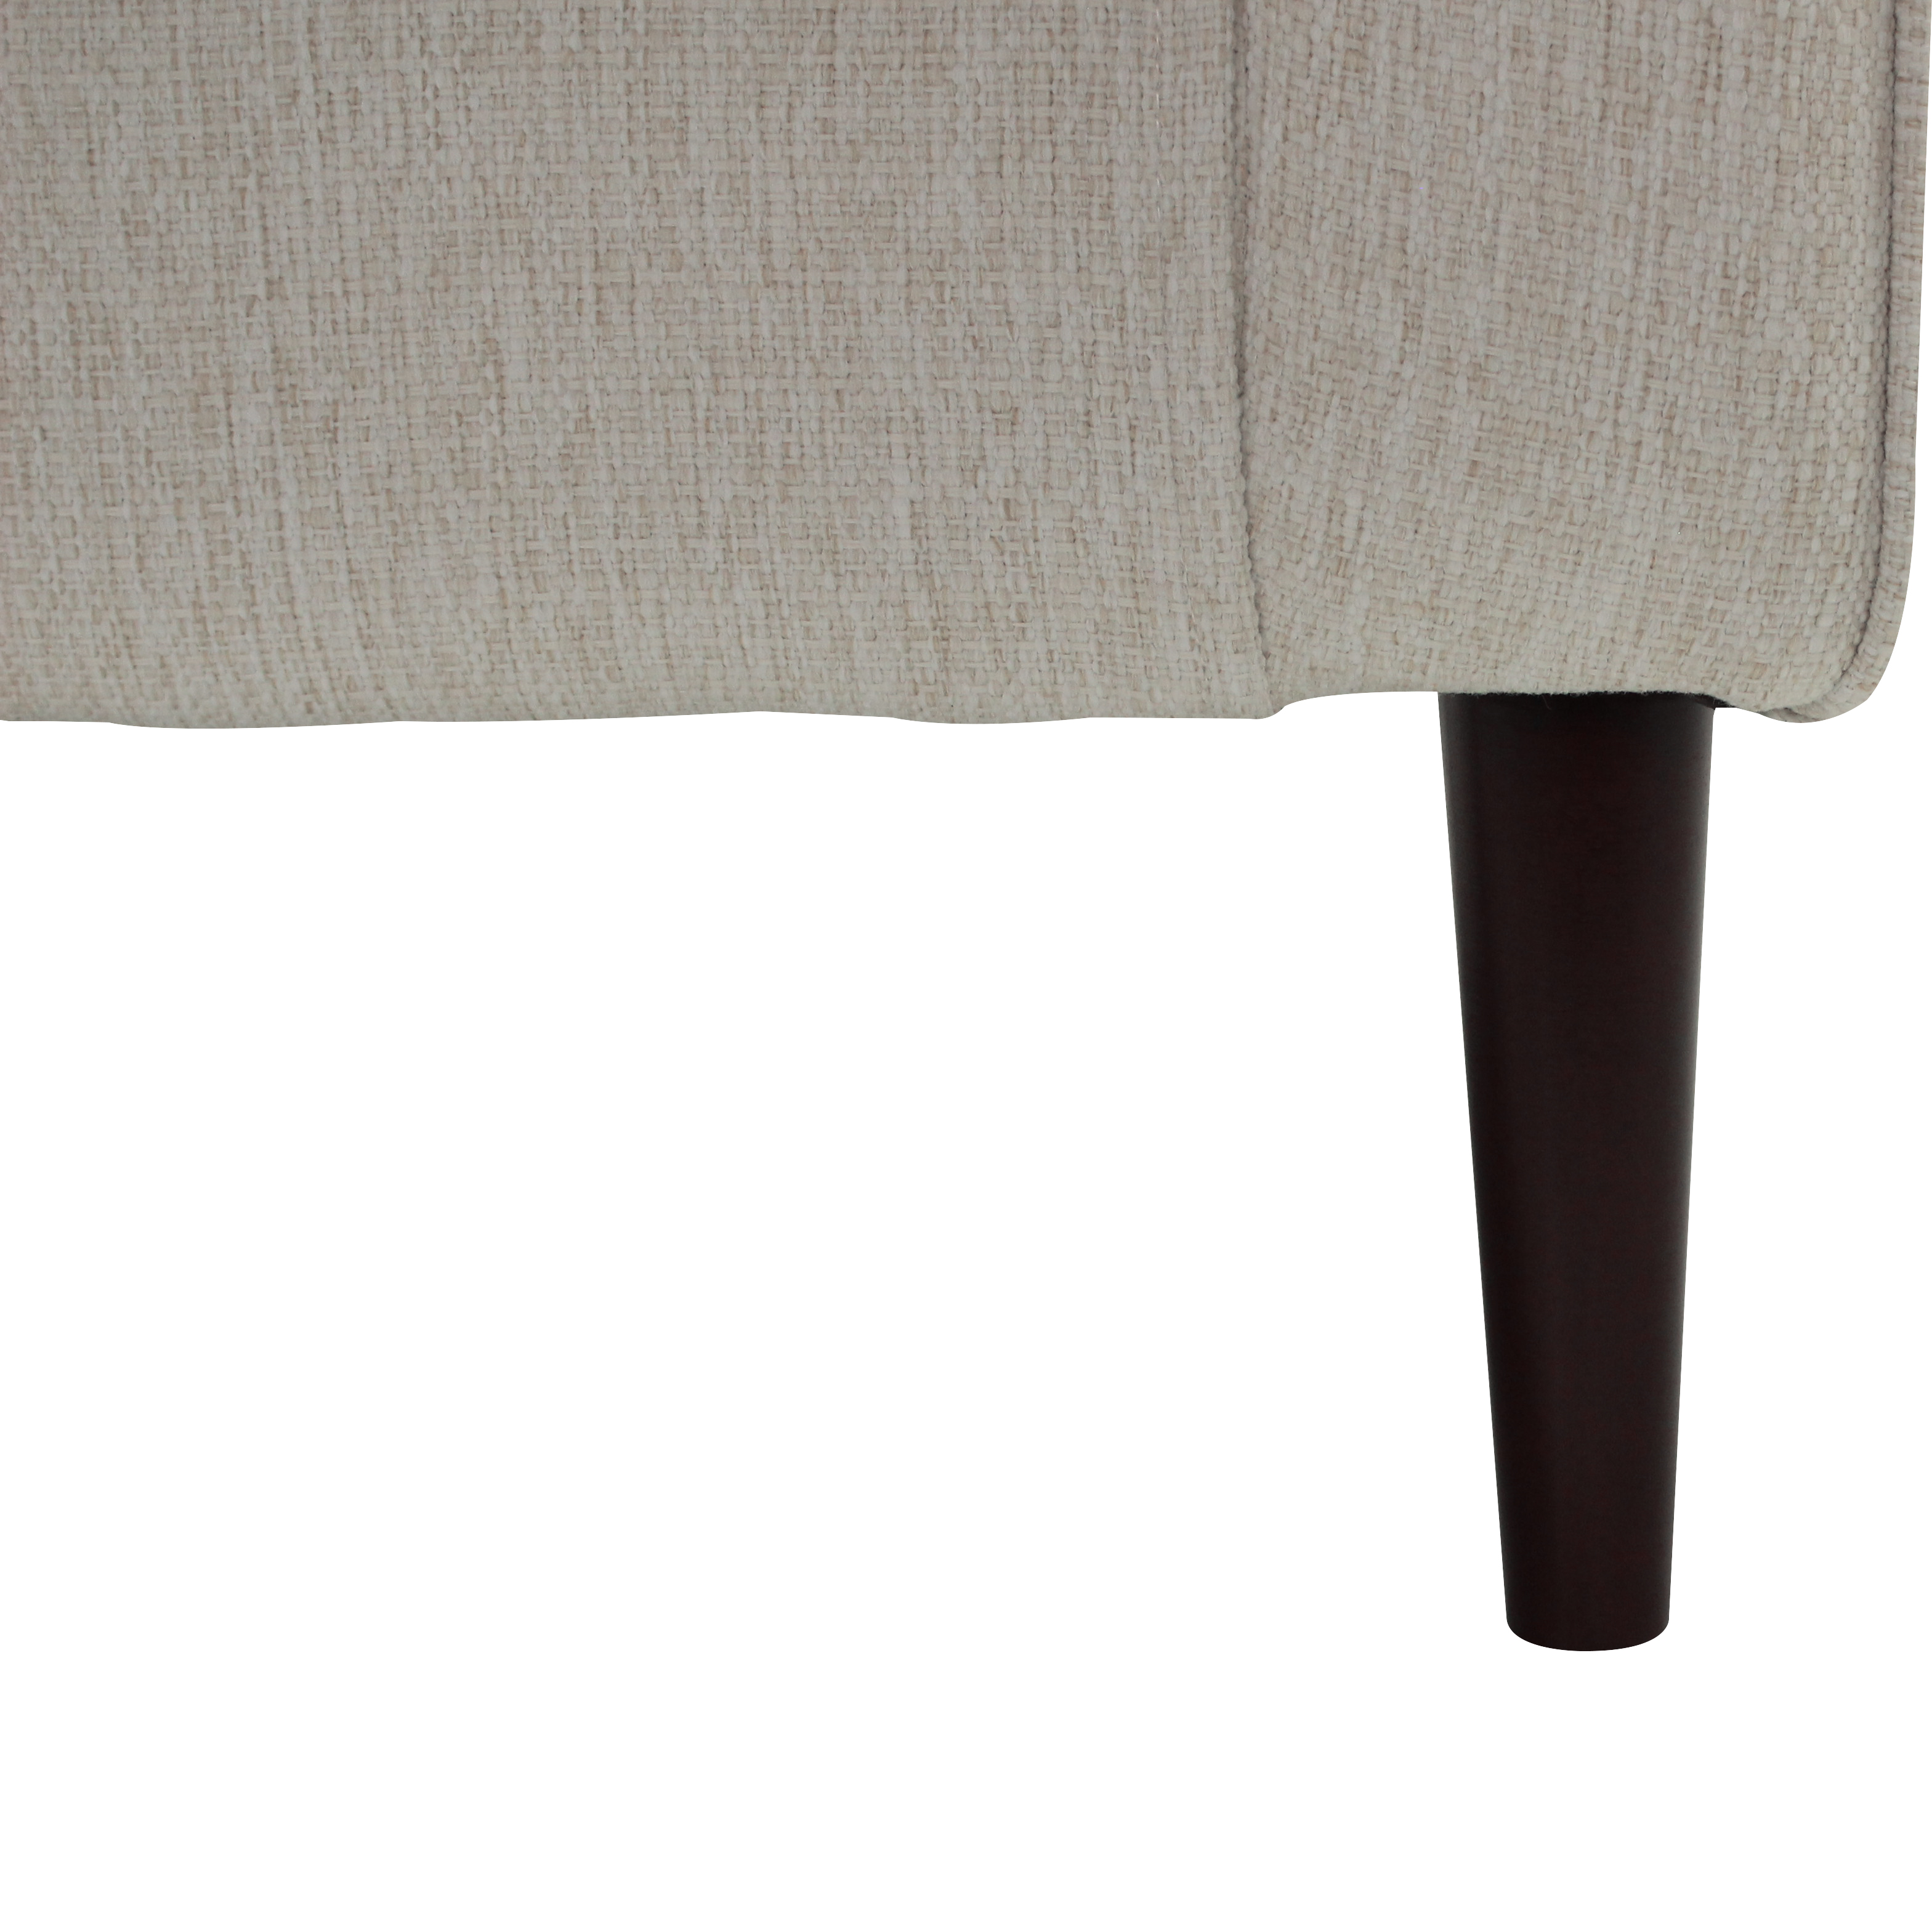 Better Homes & Gardens Poppy Lounge Chair, Multiple Colors - image 3 of 6